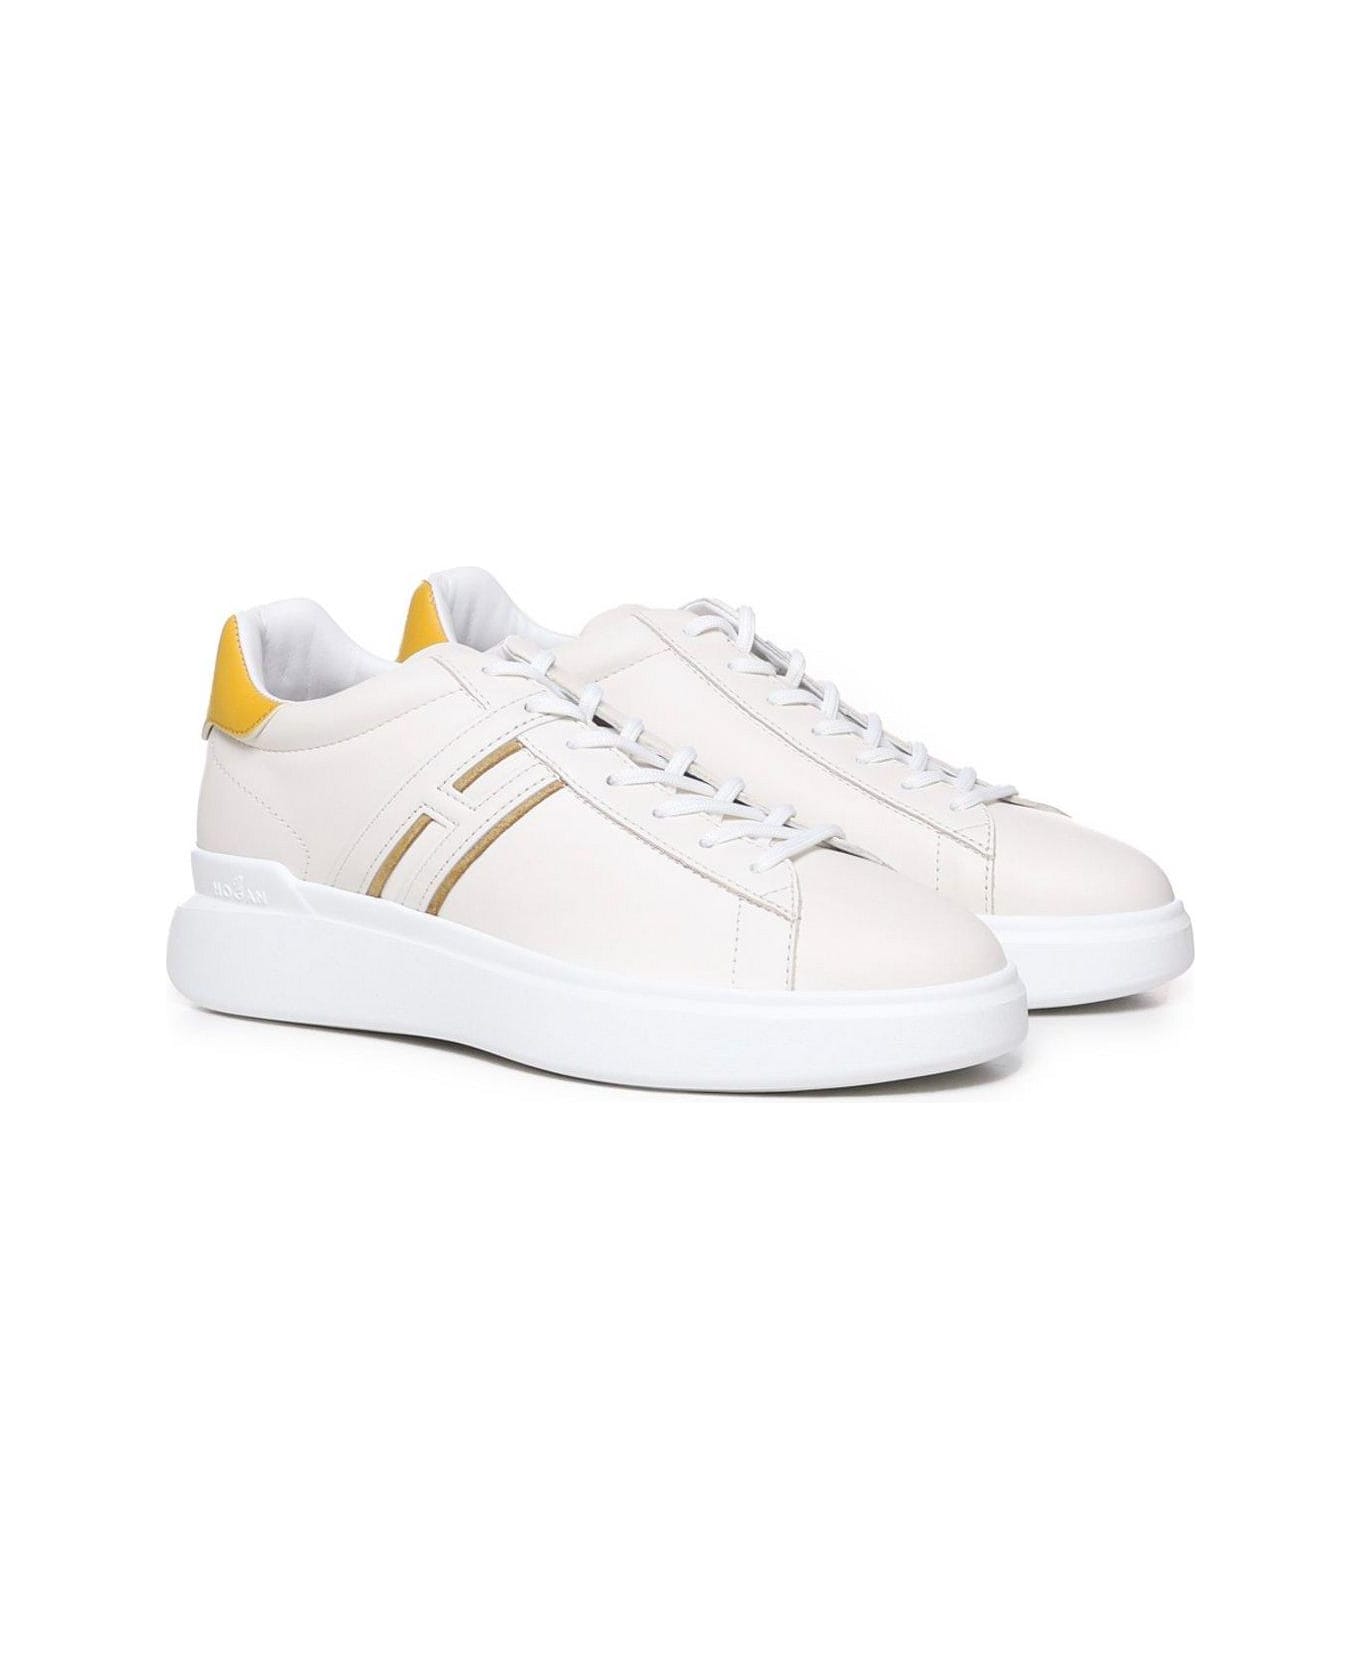 Hogan H580 Side H Patch Sneakers - White, yellow